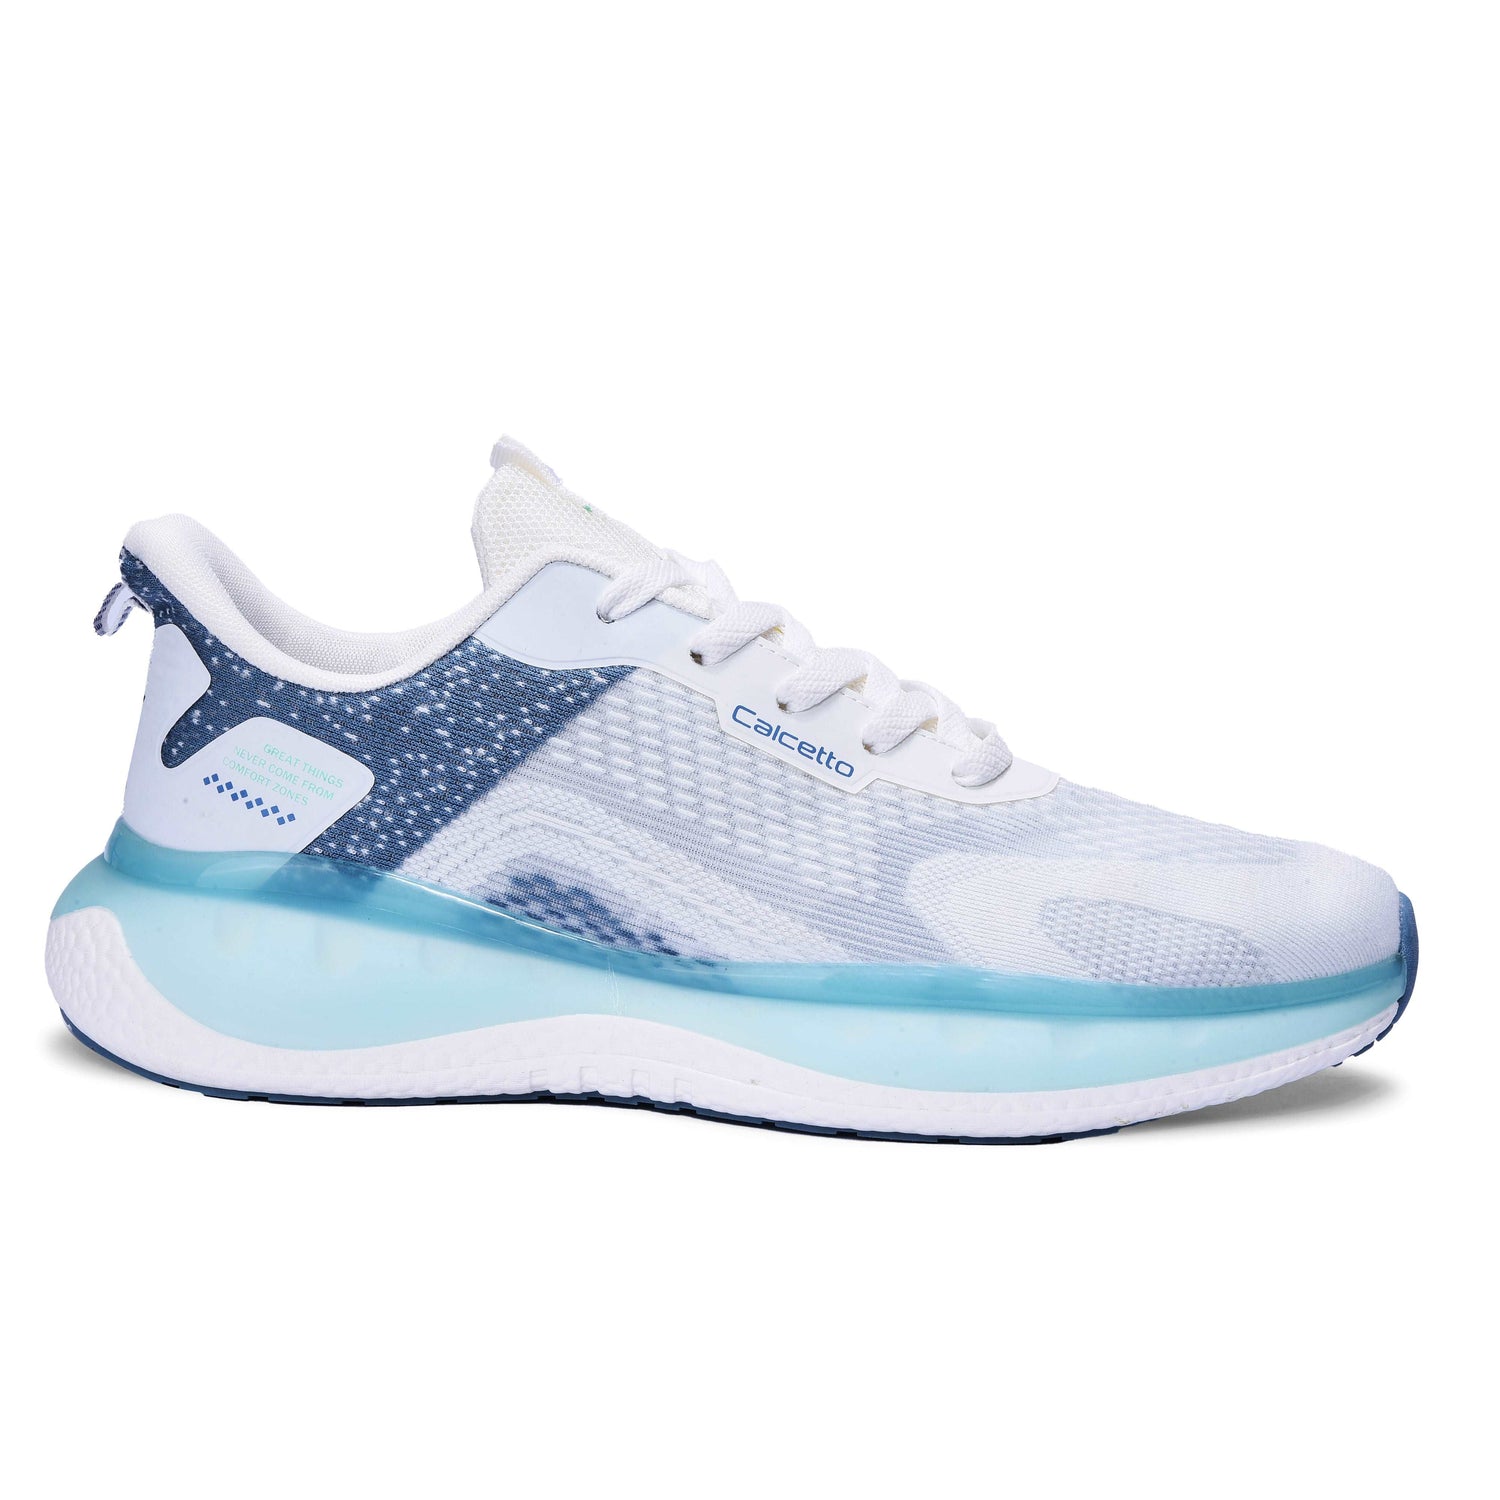 Calcetto CLT-0986 White Blue Running Sports Shoe For Men